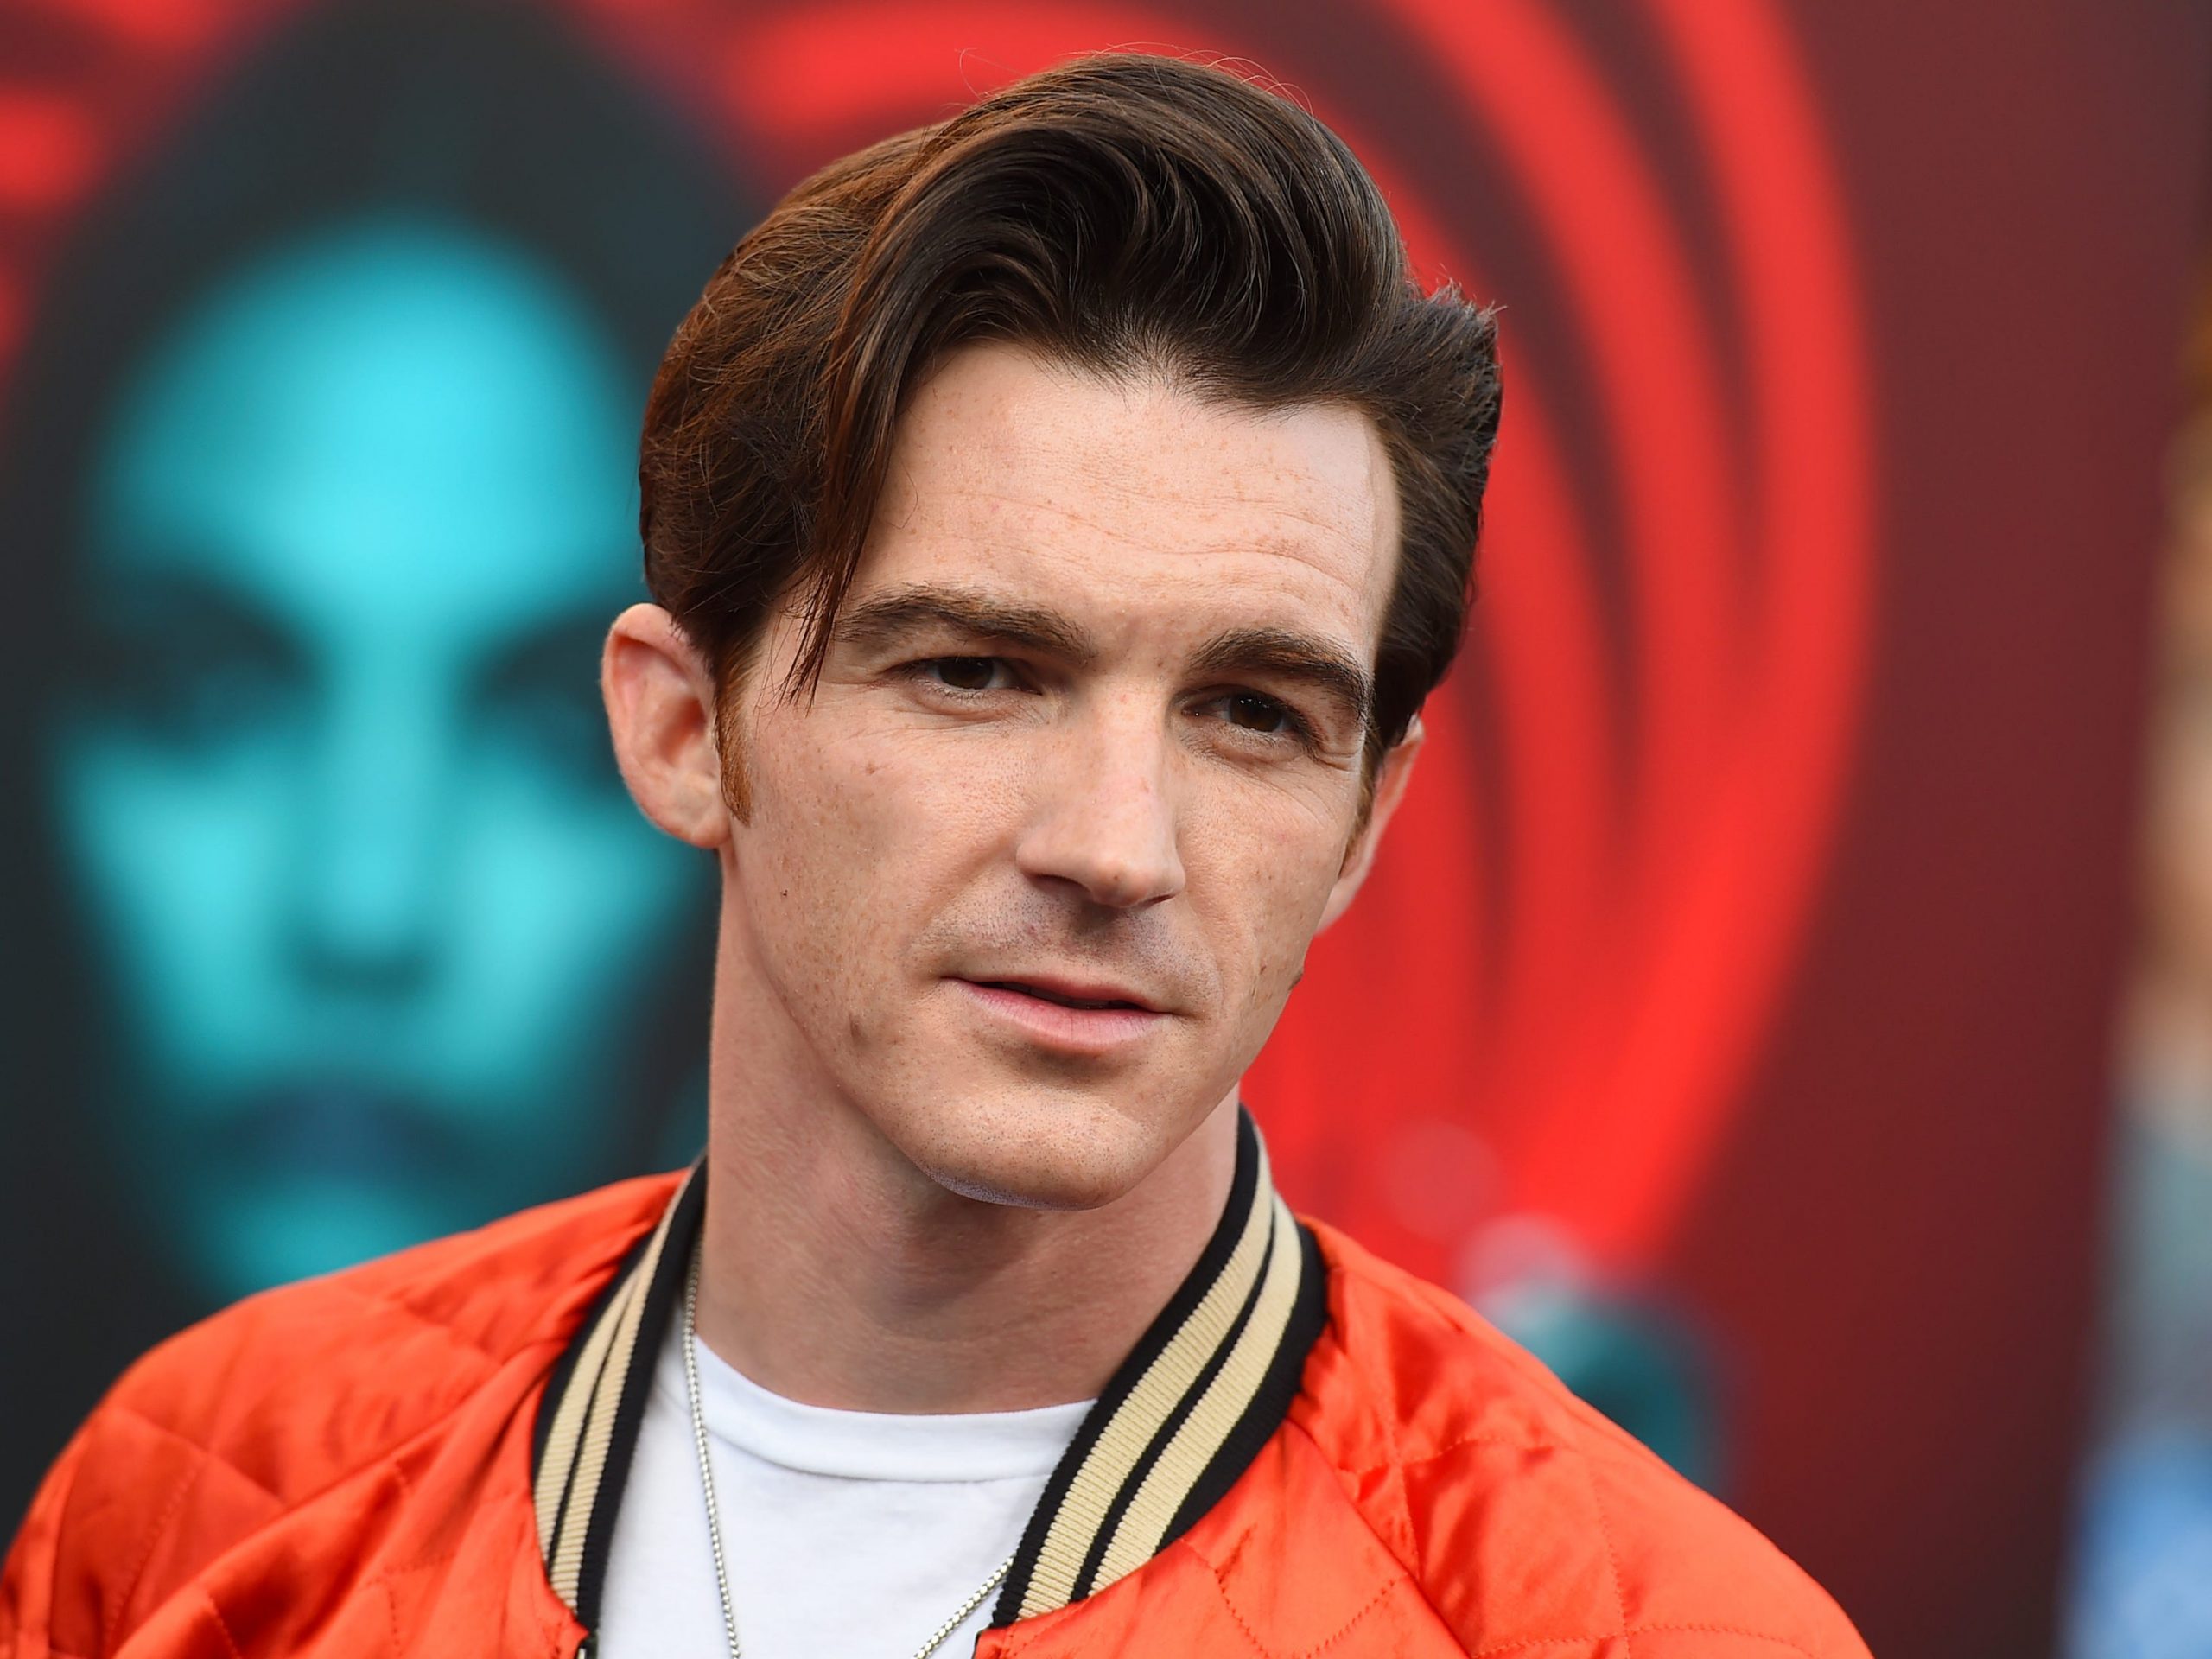 Drake Bell at the world premiere of "The Spy Who Dumped Me" in 2018